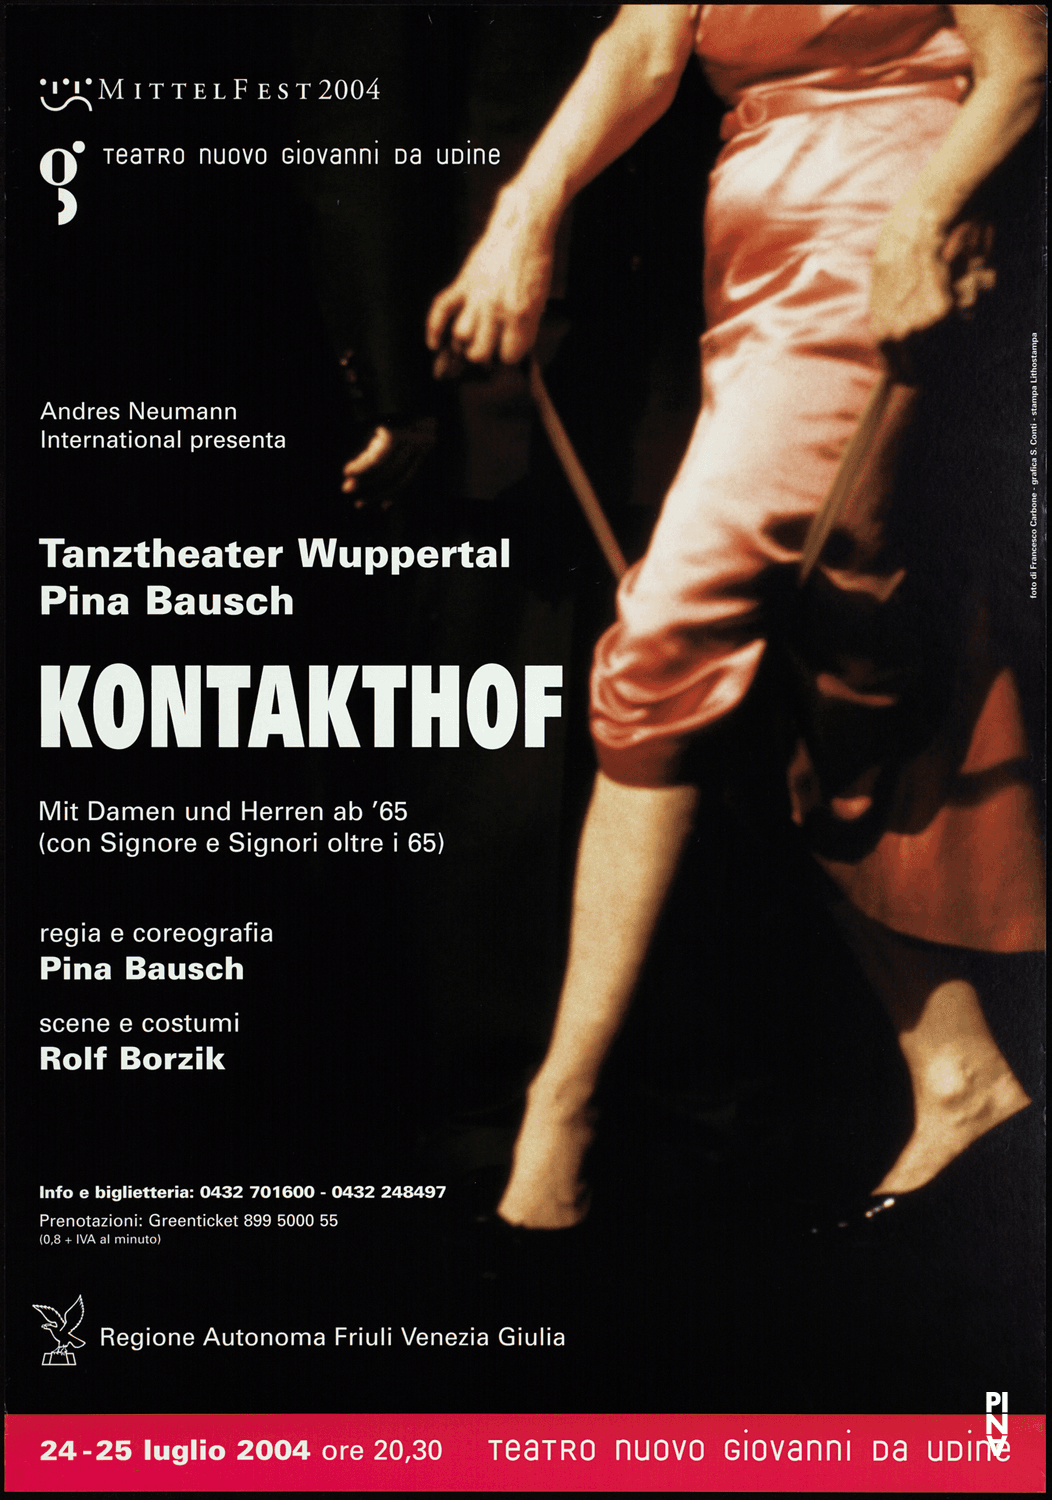 Poster for “Kontakthof. With Ladies and Gentlemen over 65” by Pina Bausch in Udine, 07/24/2004 – 07/25/2004